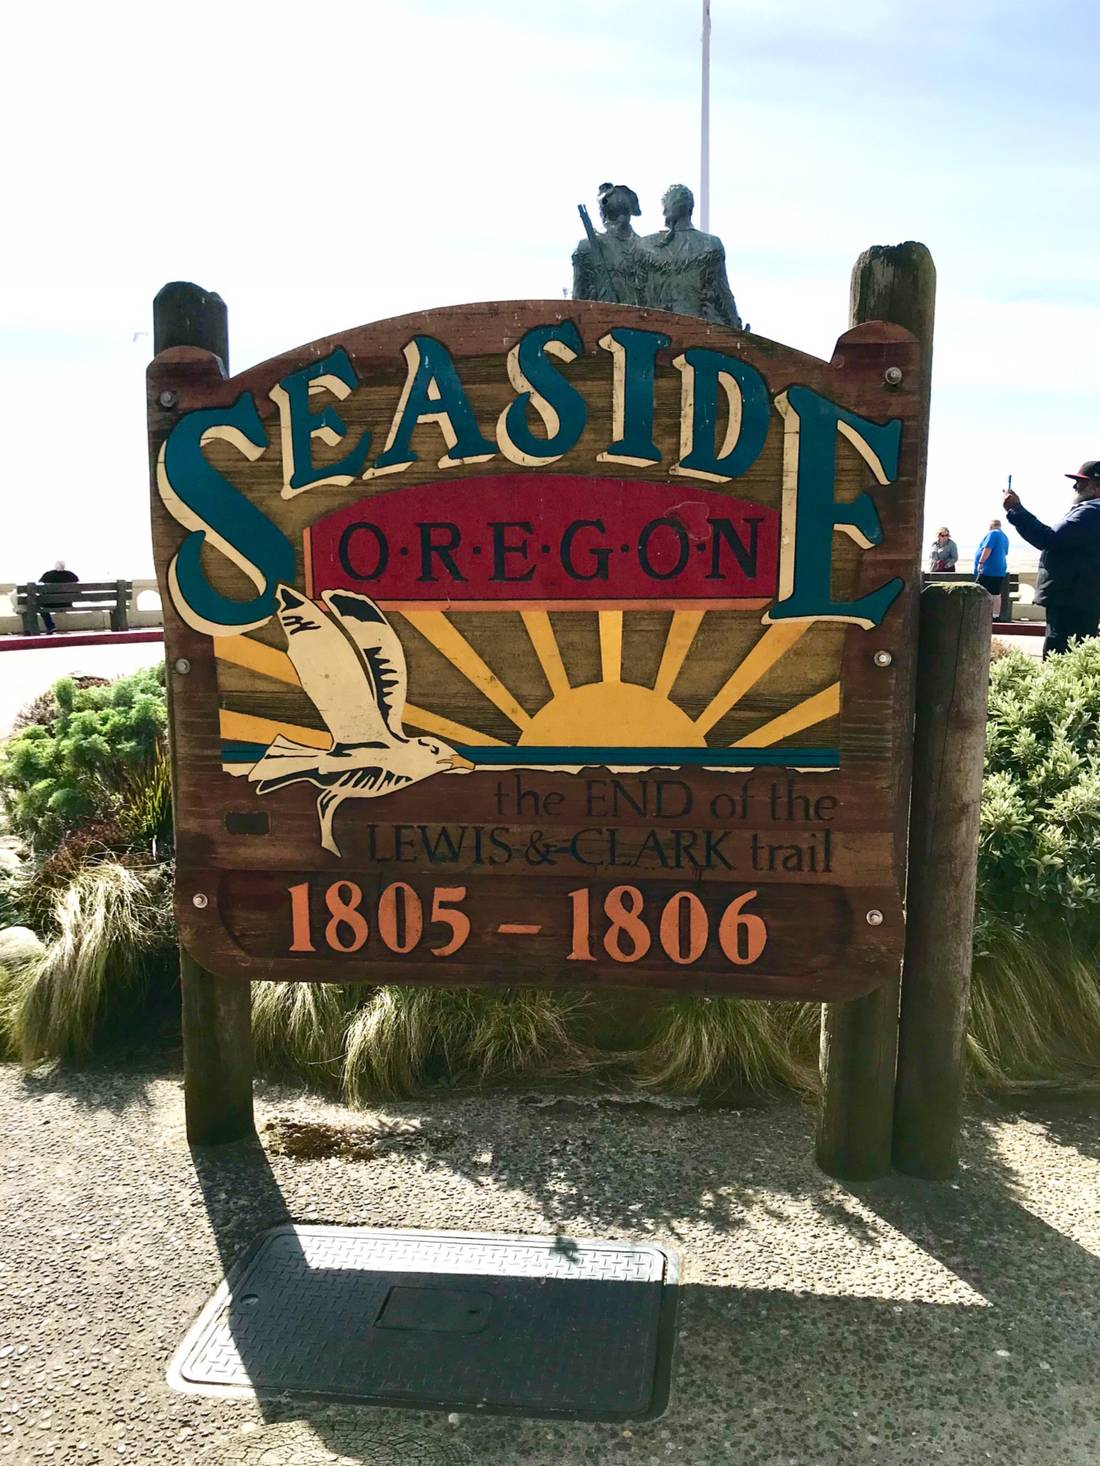 Where Seaside’s main street (Broadway) meets the Promenade, the Seaside sign commemorates the year the Lewis and Clark expedition spent on the Oregon coast.